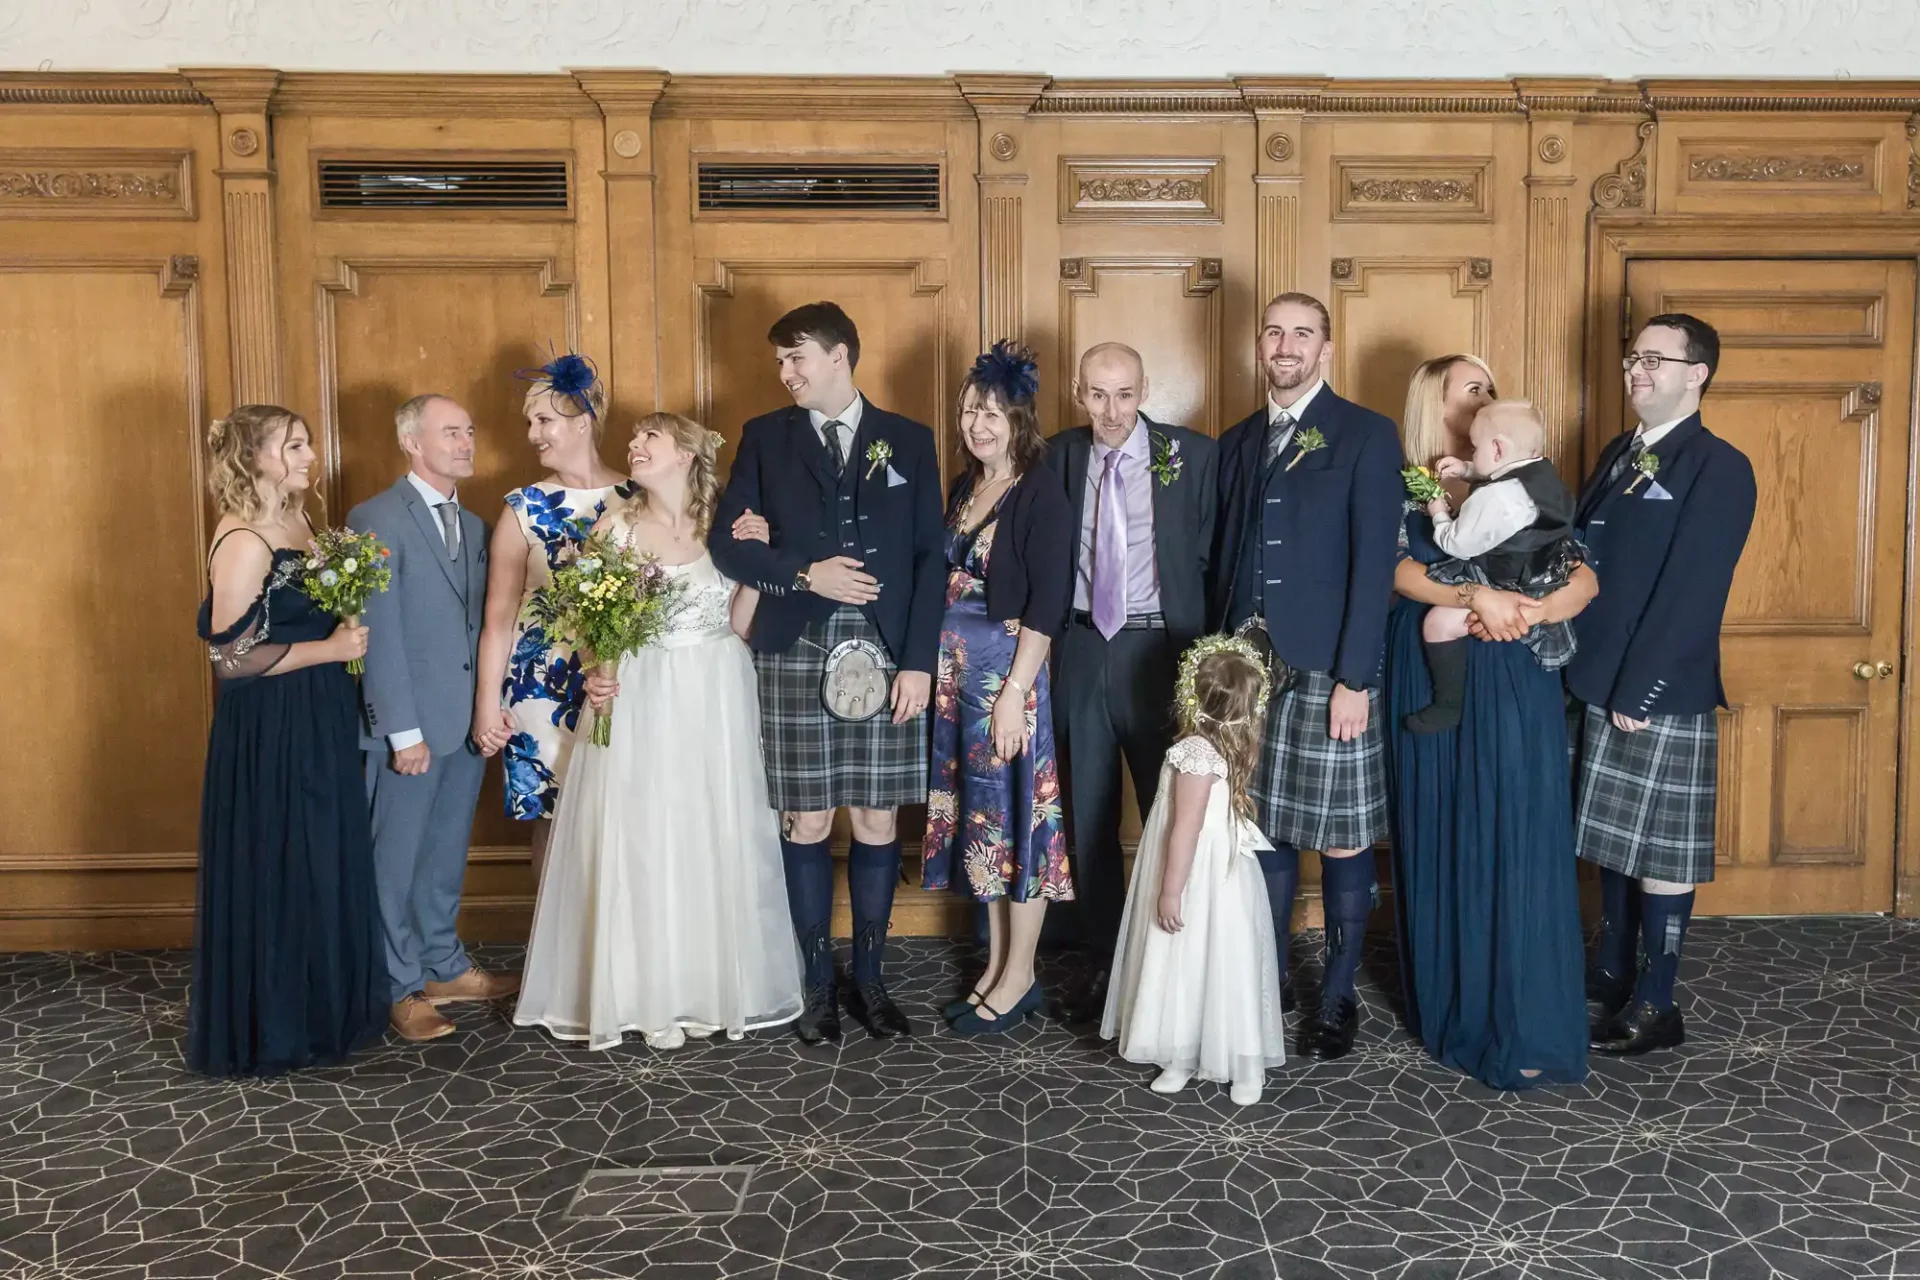 A family dressed in formal attire, including kilts, posing in a line at a wedding event, with a variety of happy expressions and interactions.